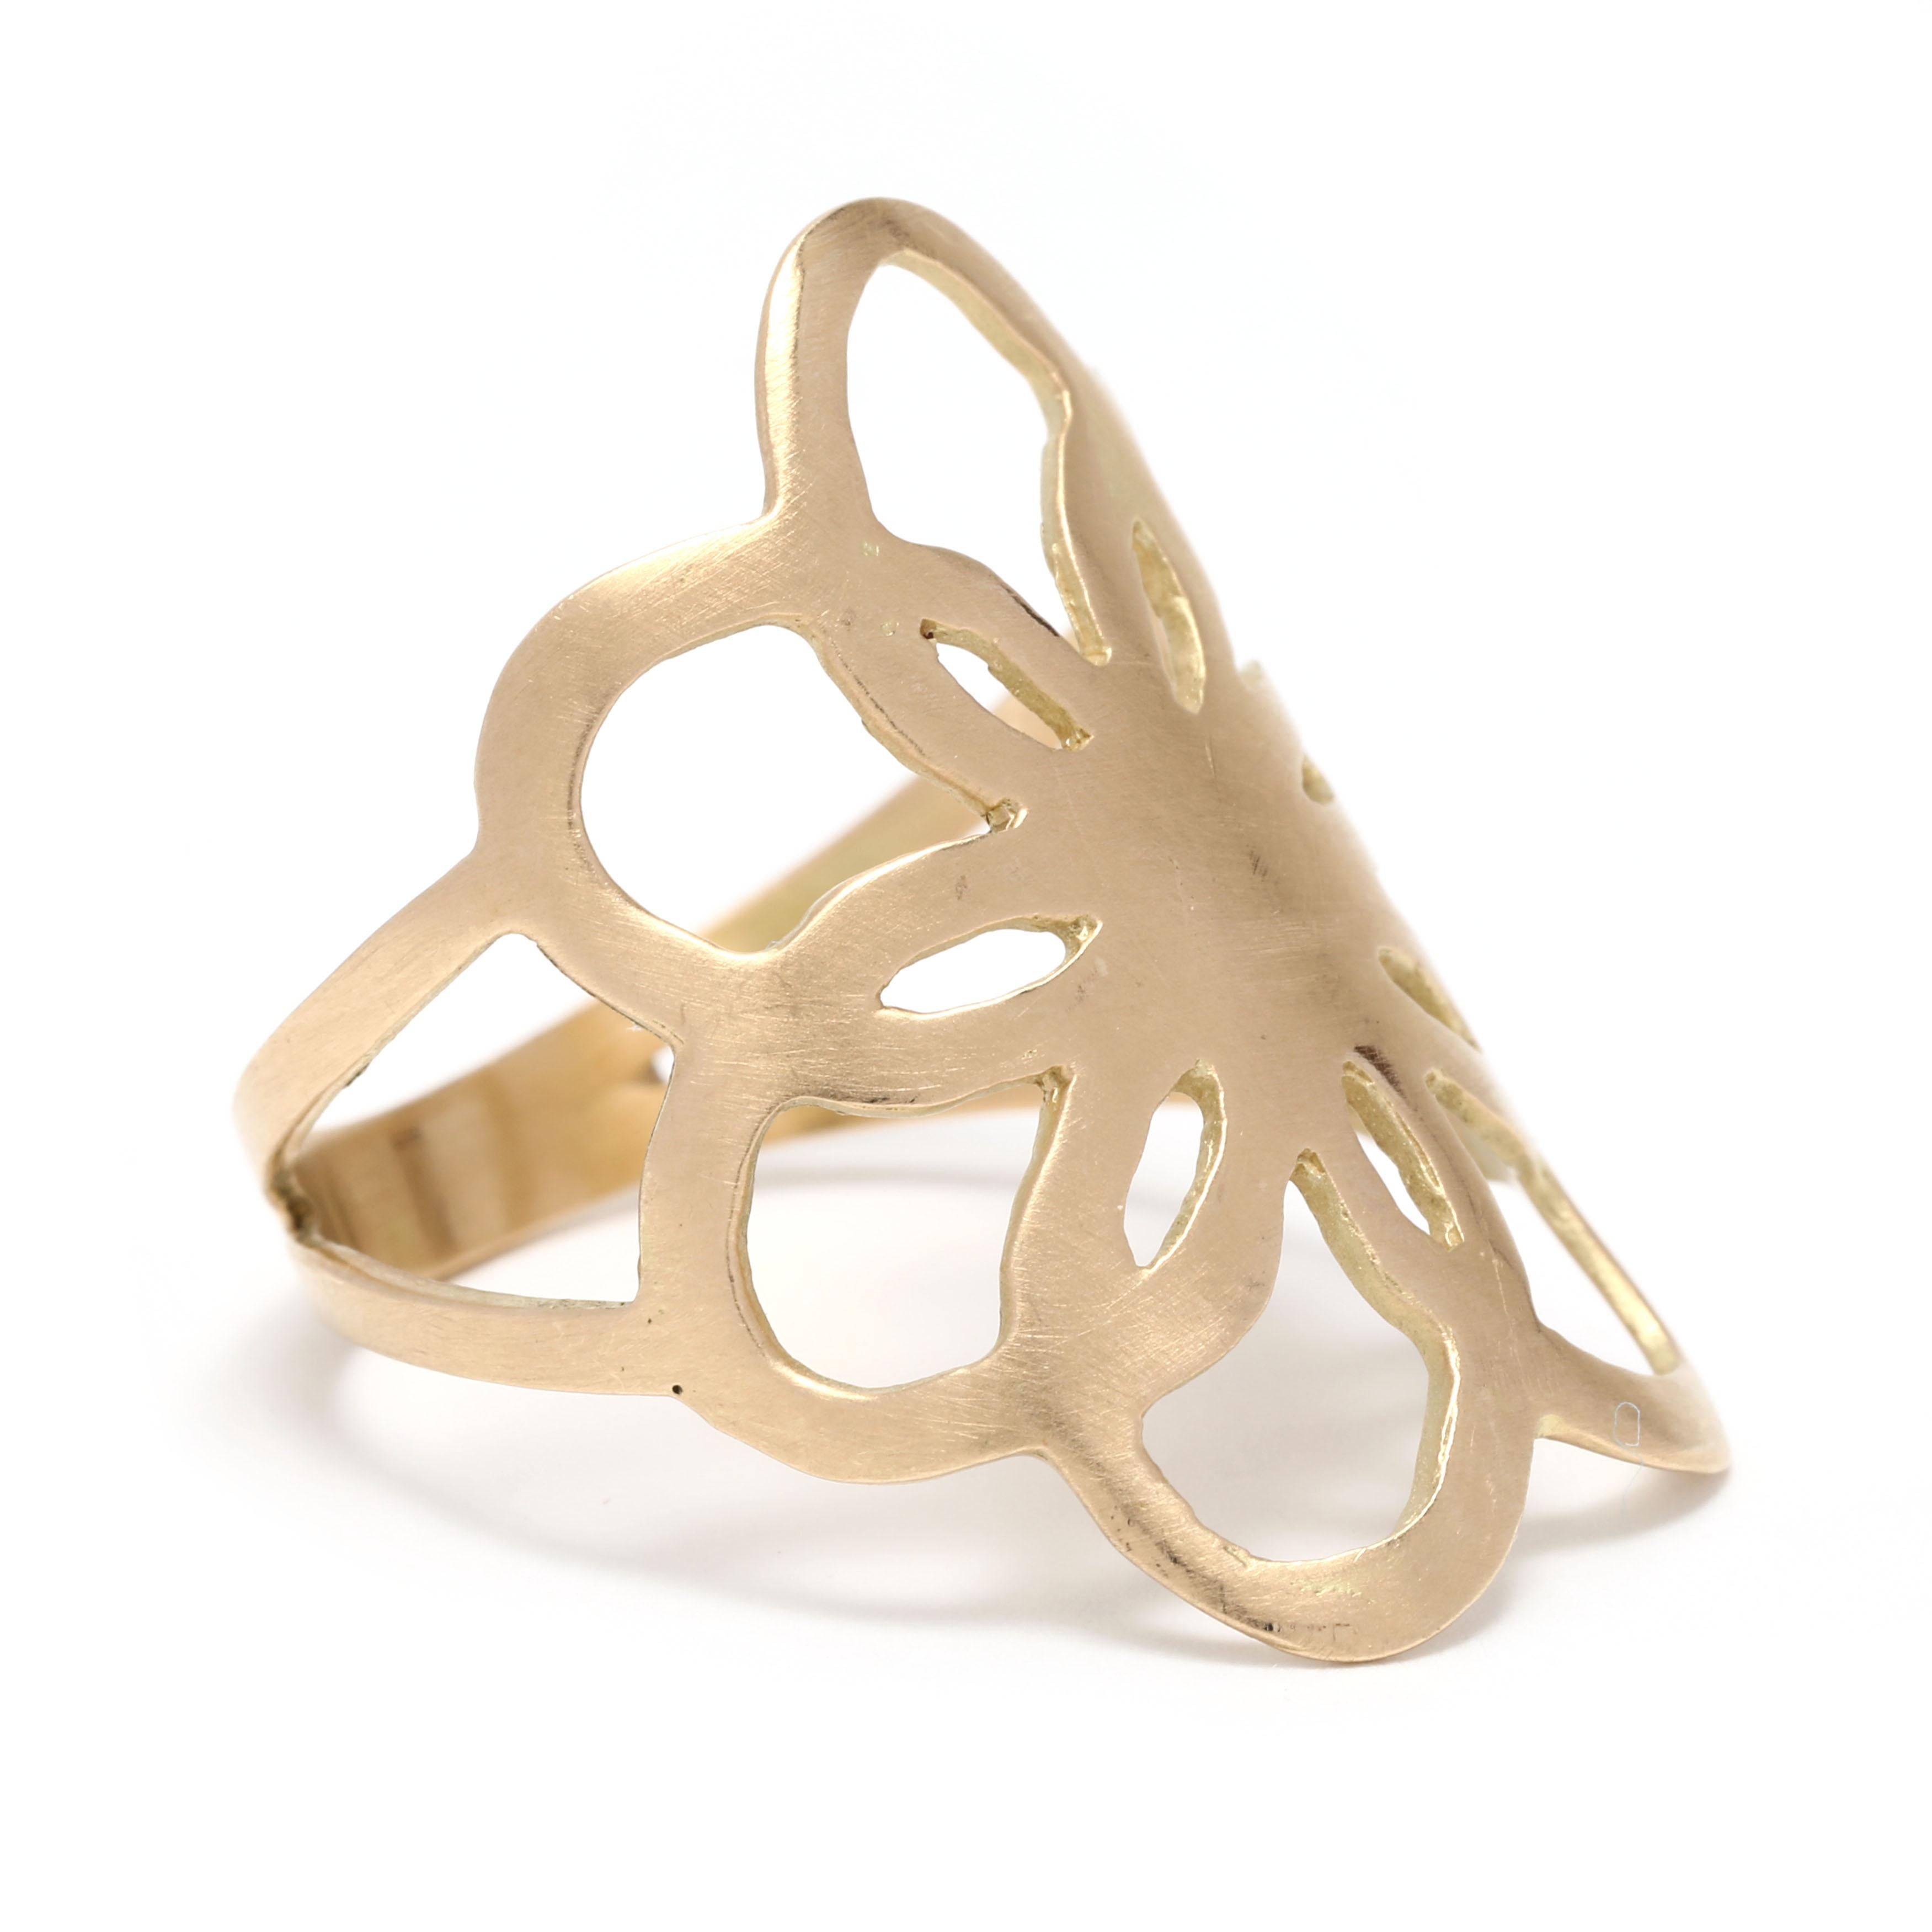 This 18K Yellow Gold Flat Flower Statement Ring offers an elegant and simple design that is perfect for everyday wear. The ring features a matte finish flower that is approximately 0.8 inches in diameter. The ring size is 7.25 and is the perfect